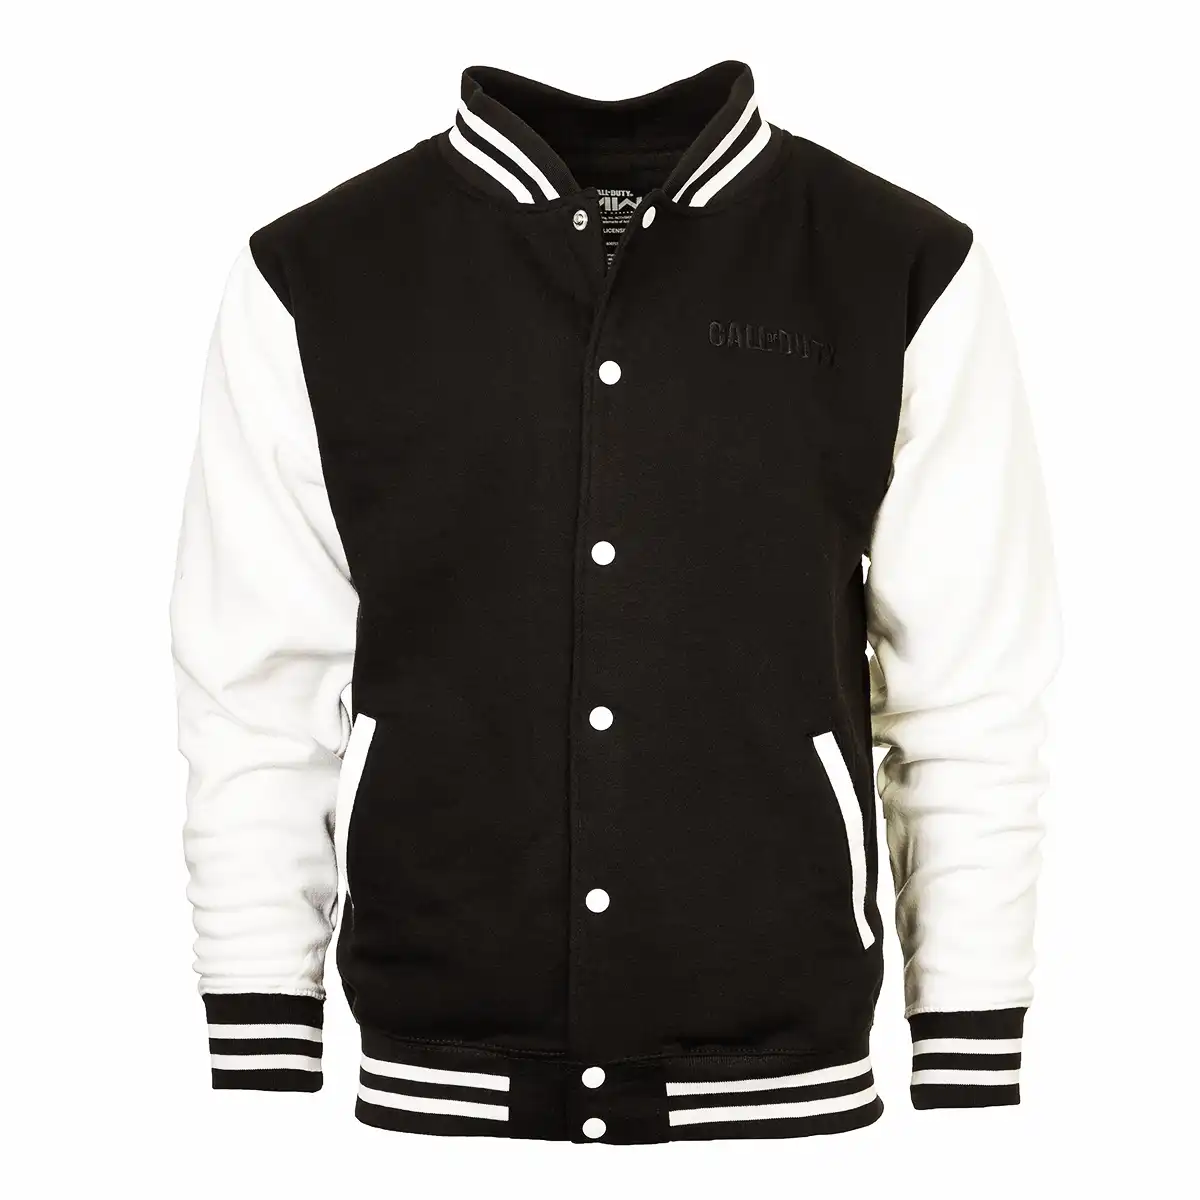 Call of Duty College Jacket "Ghost" Black/White M